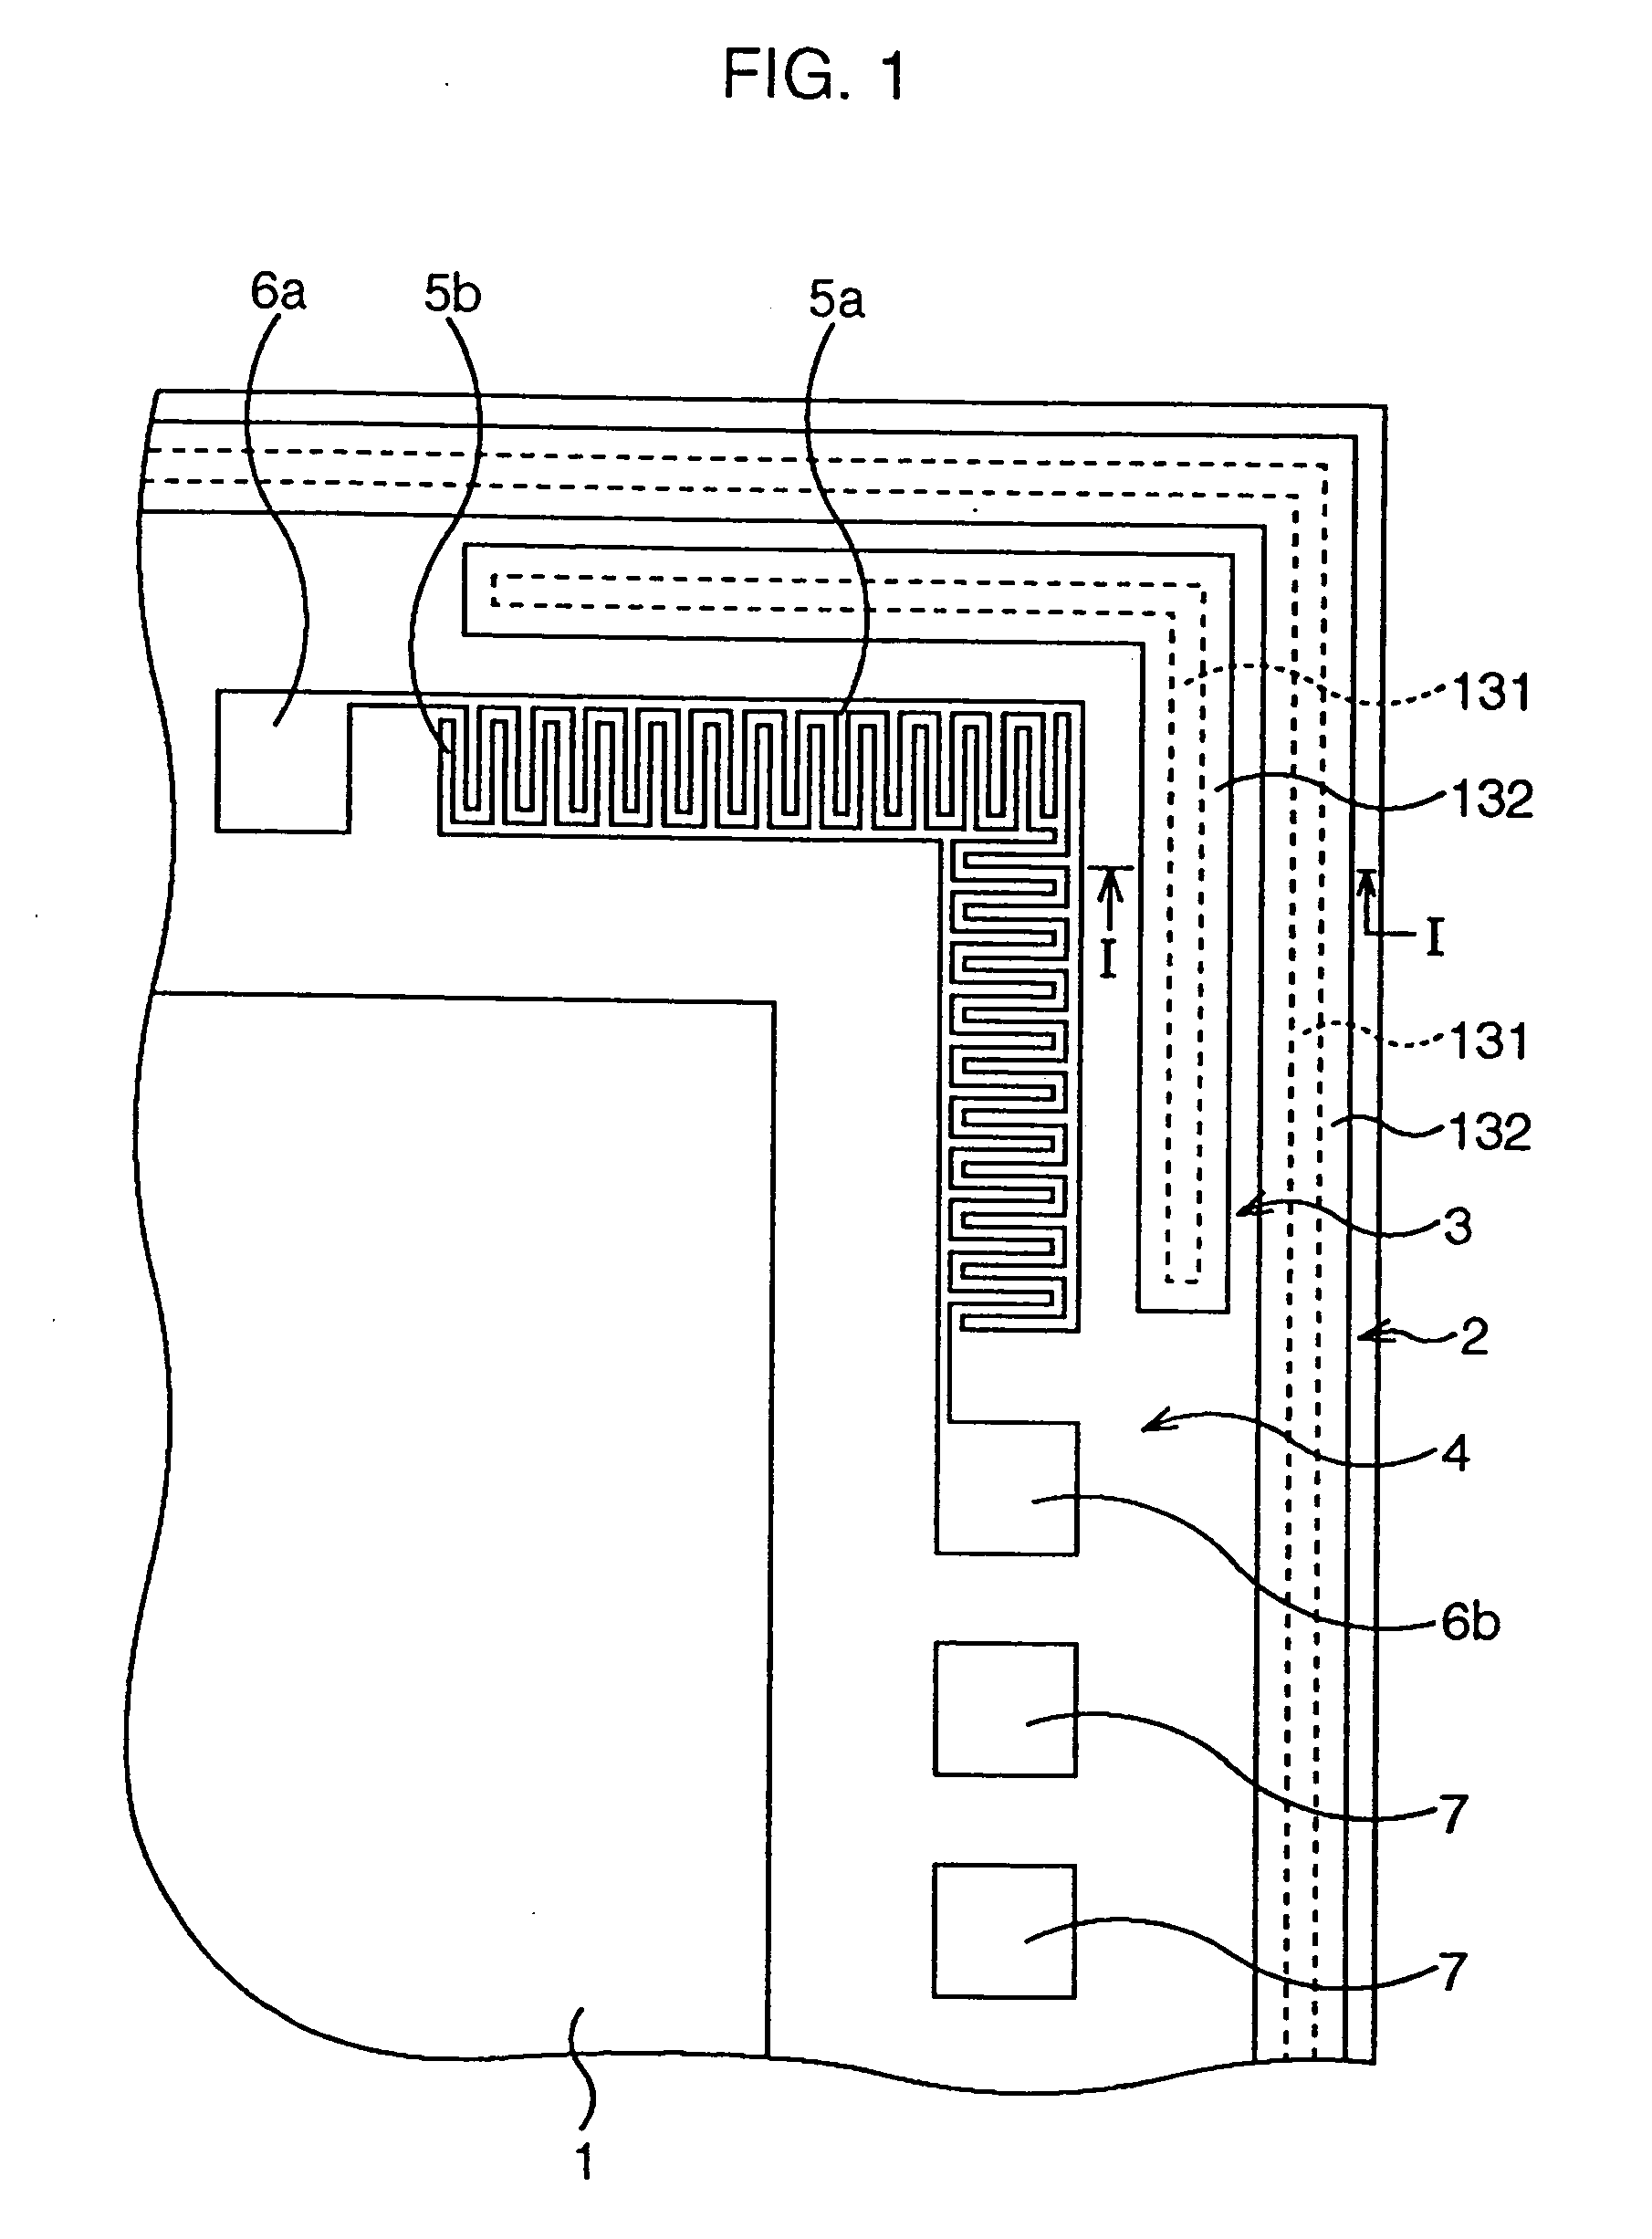 Semiconductor device, method of manufacturing the same, and phase shift mask